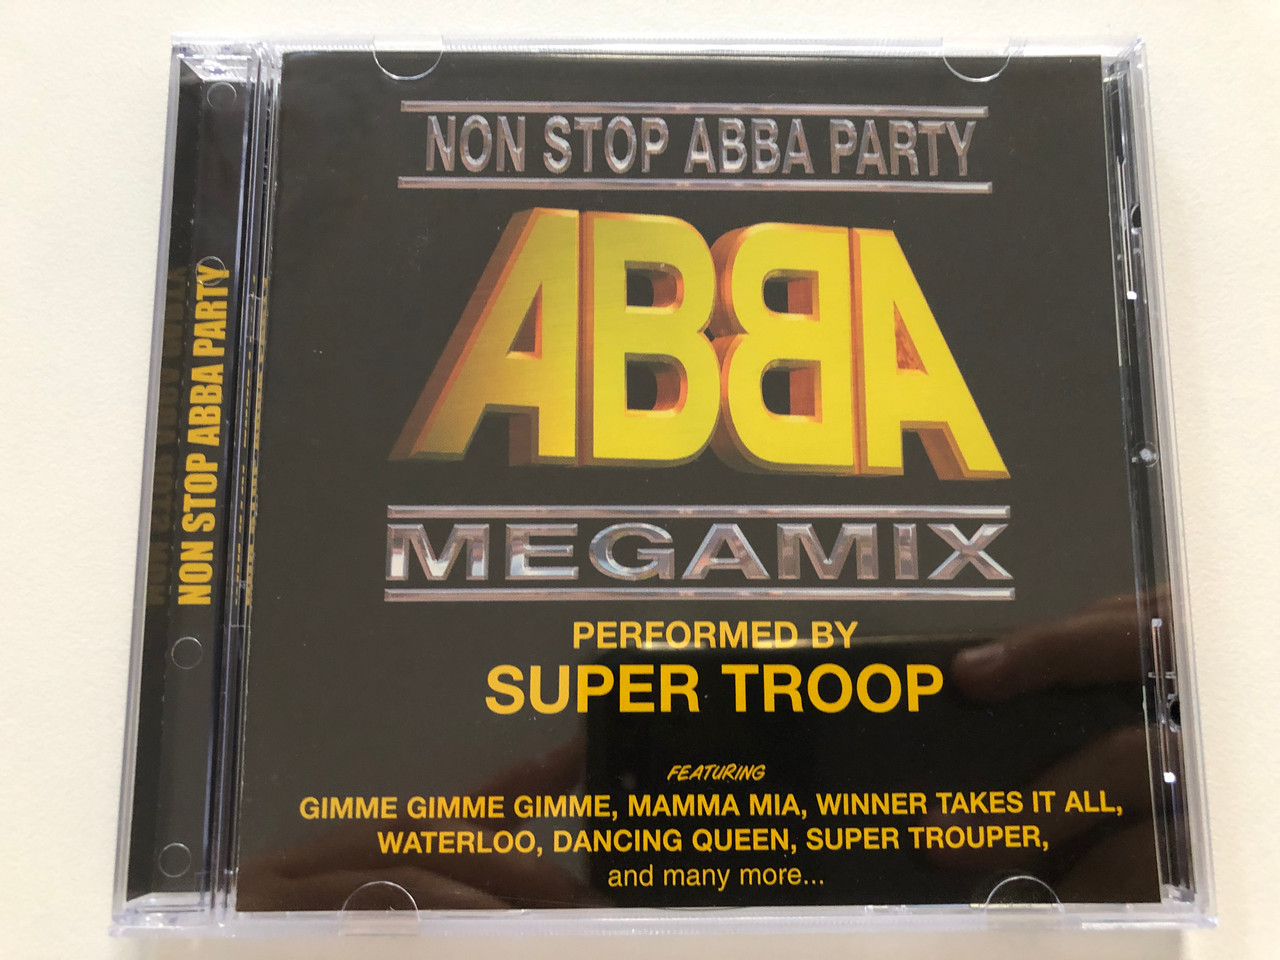 Non Stop Abba Party - ABBA Megamix / Performed by Super Troop / Featuring:  Gimme Gimme Gimme, Mamma Mia,